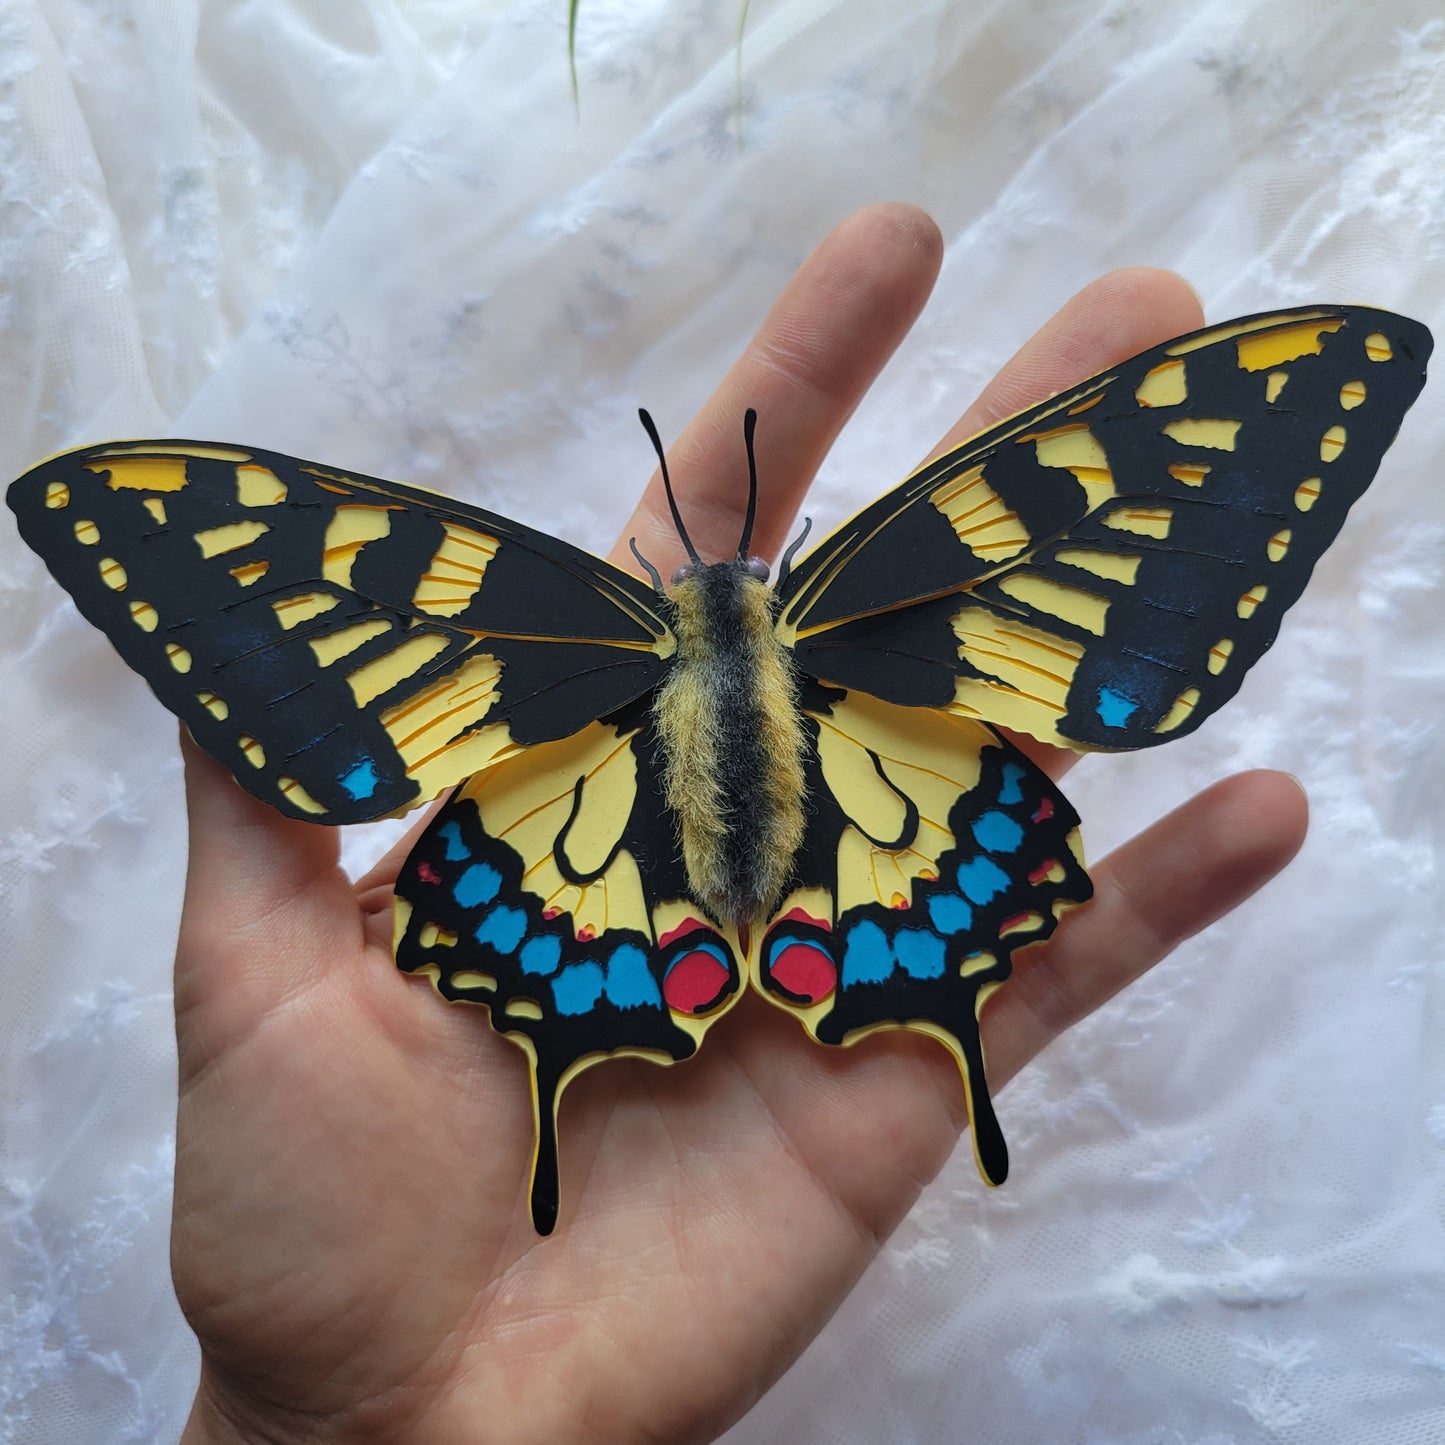 DIY Swallow Tail - DIY Your Own Paper Specimen